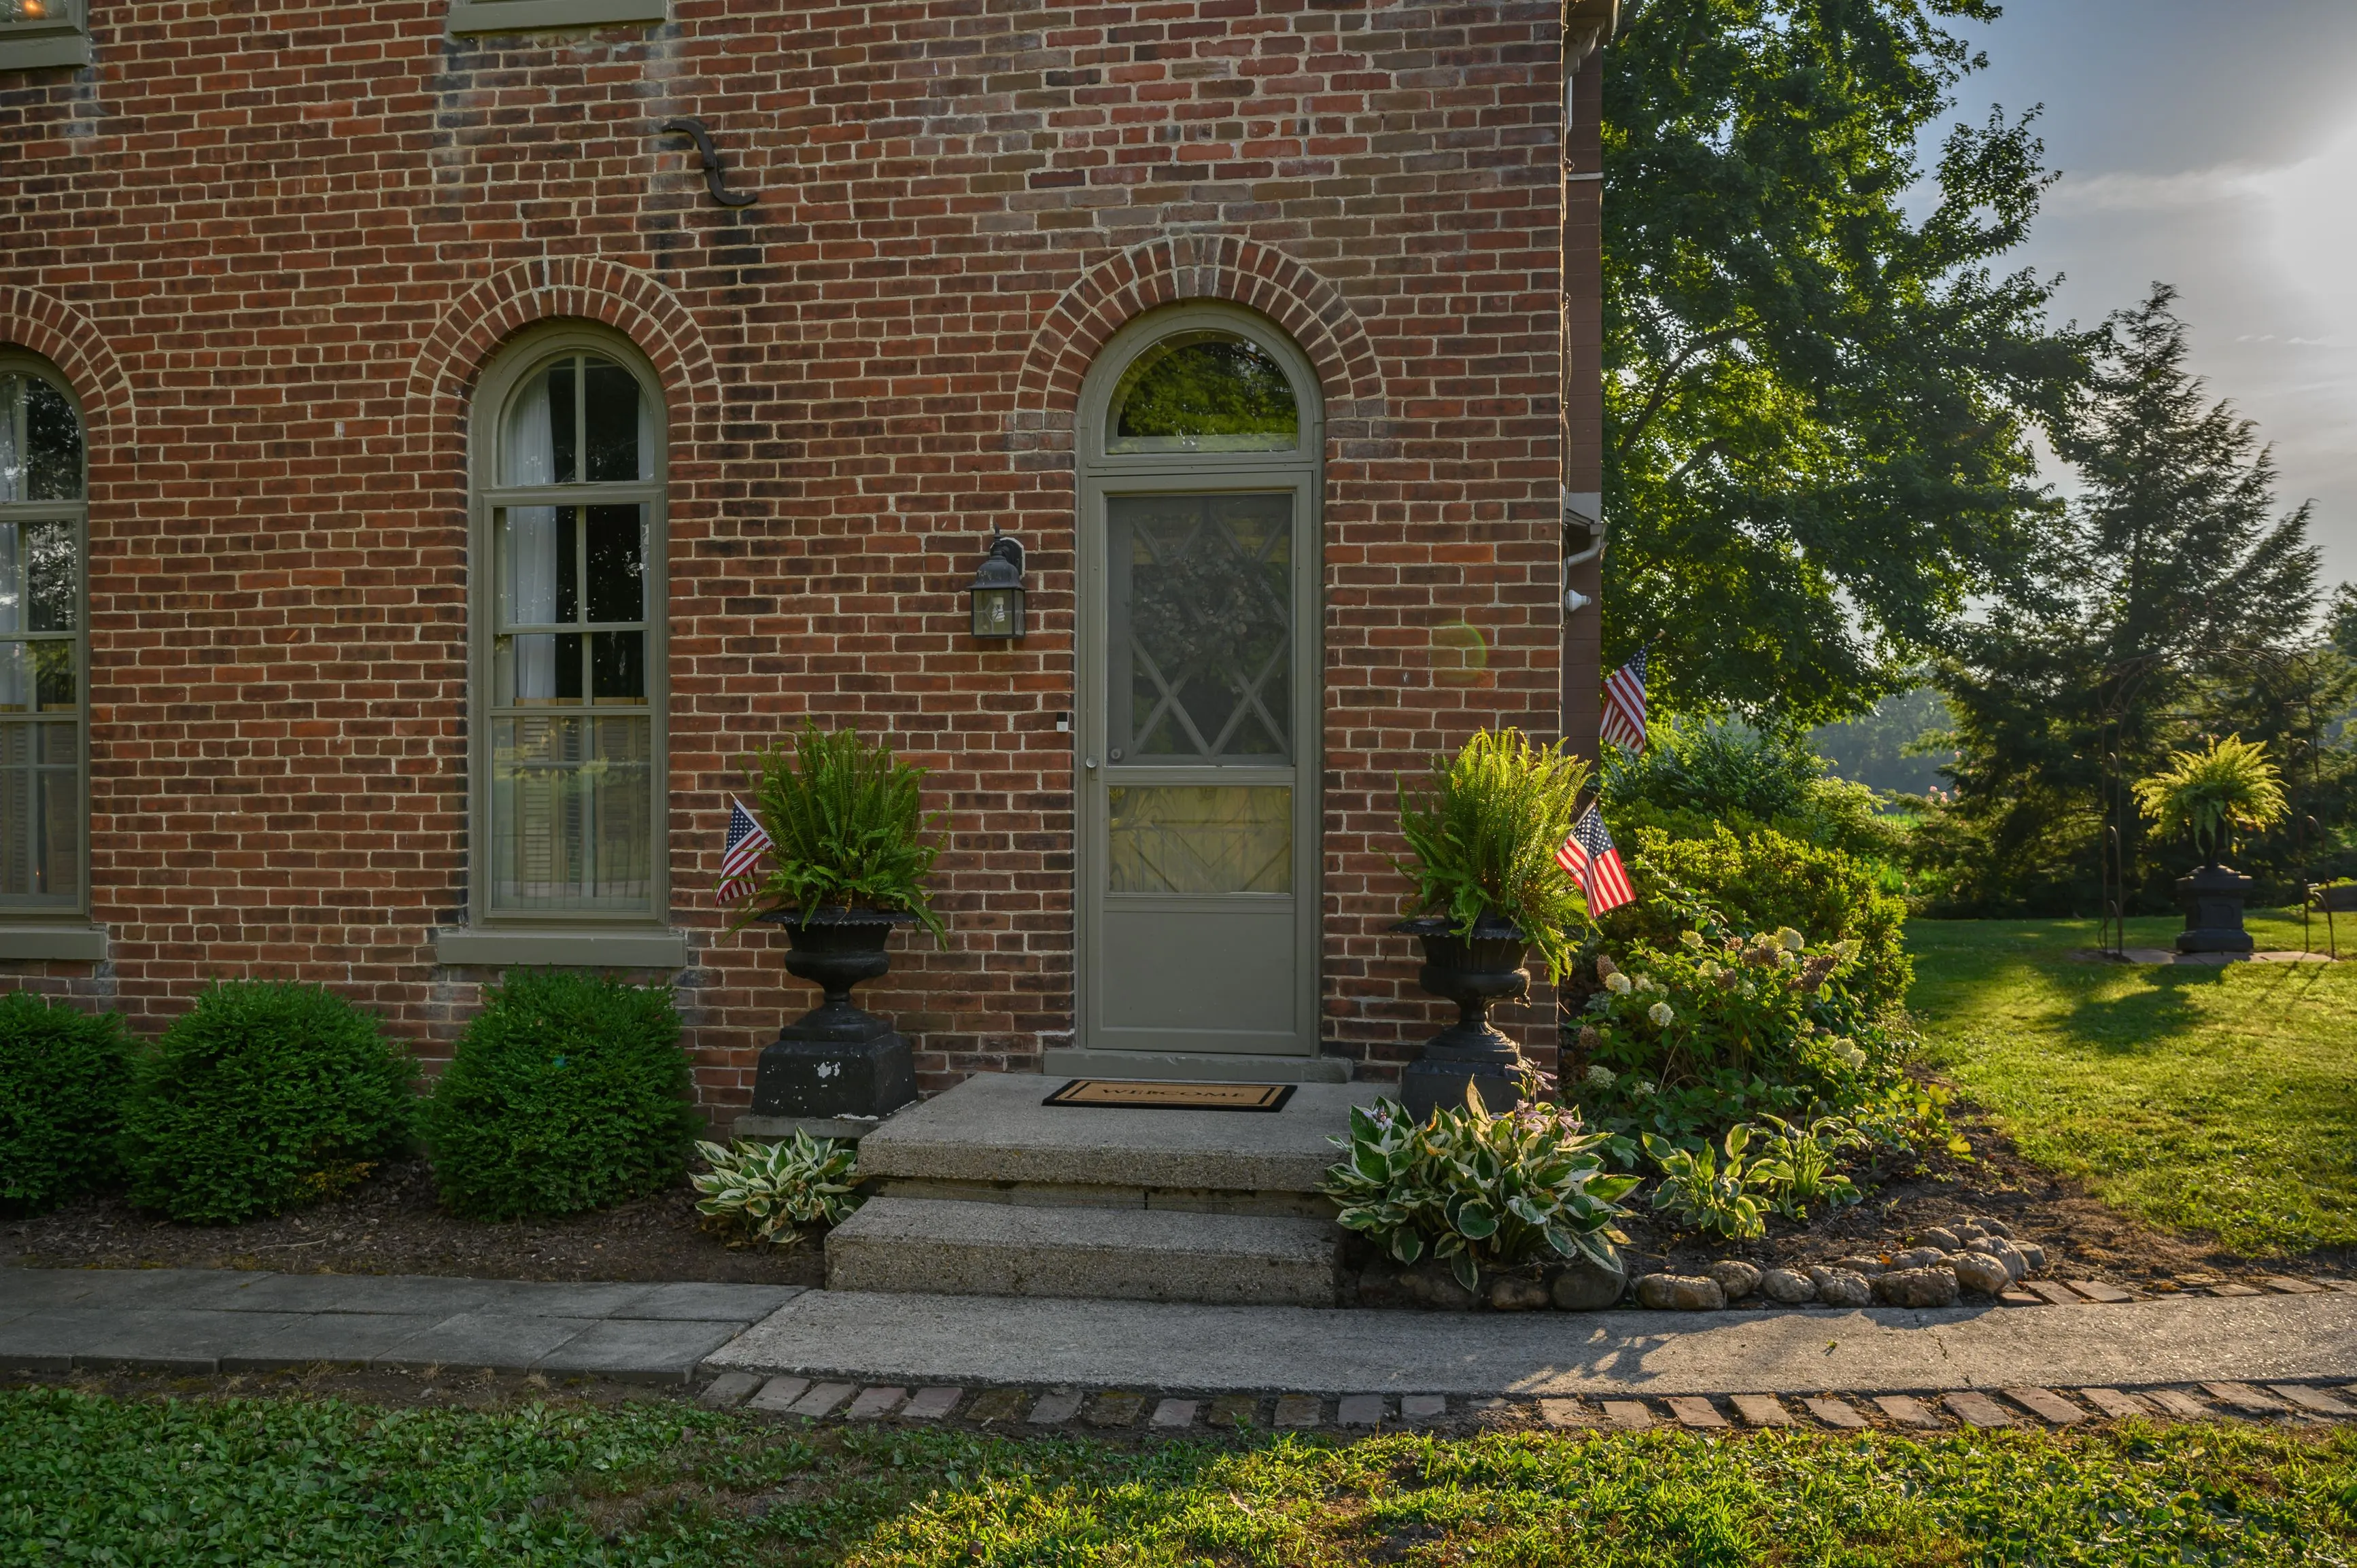 Brick house entrance with arched doorway, stone steps, adorned by potted plants and American flags, during early morning sunlight.